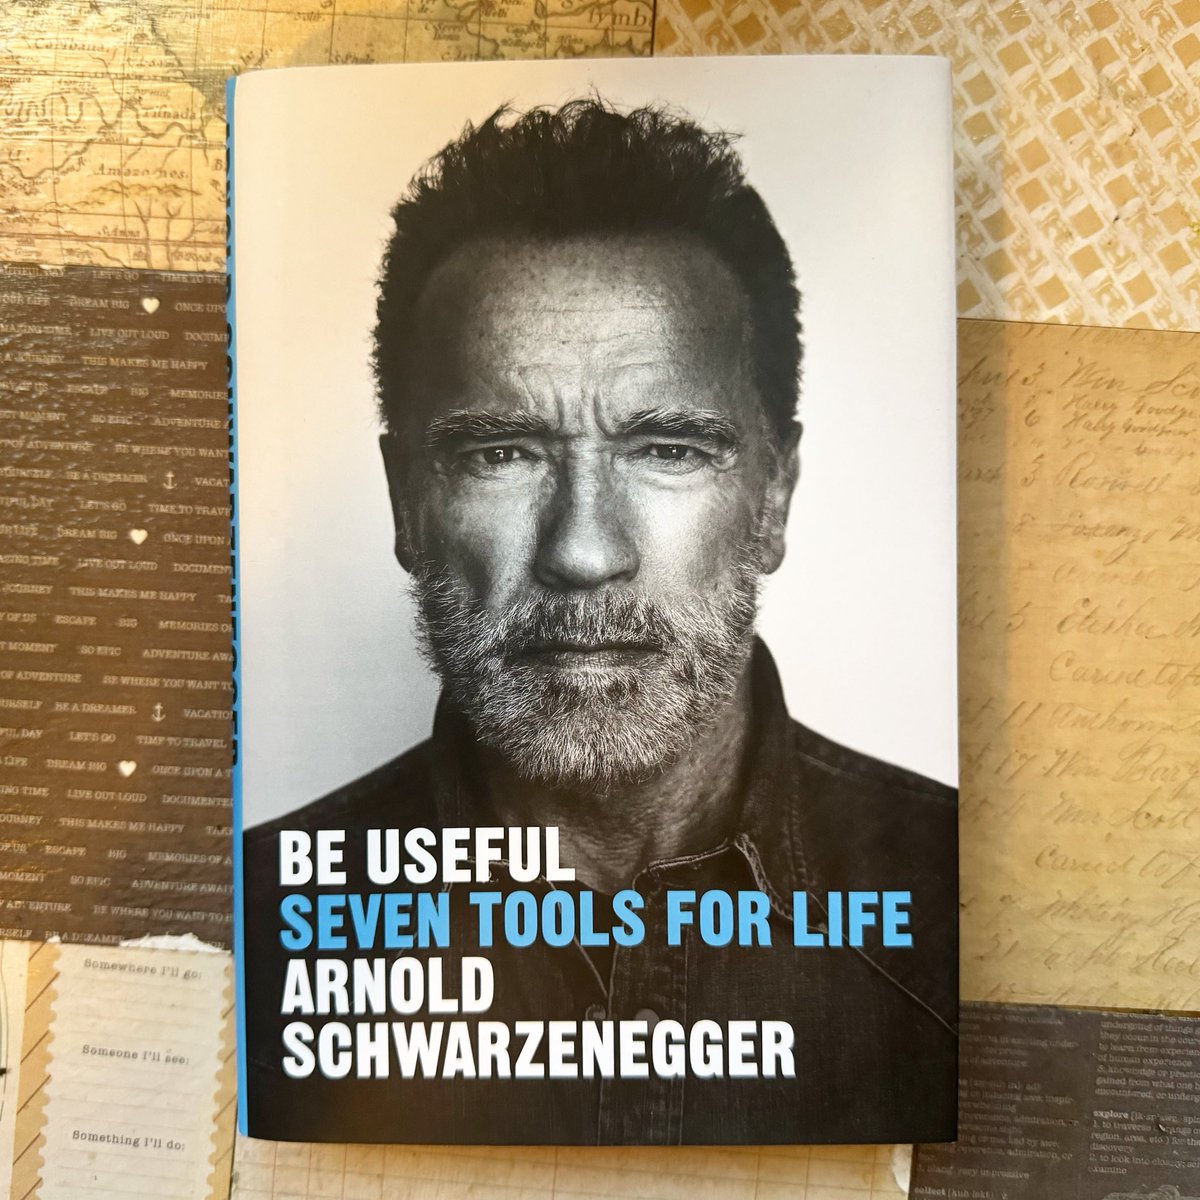 I’ll be hearing Arnold’s voice for the next 288 pages. #BeUseful @Schwarzenegger